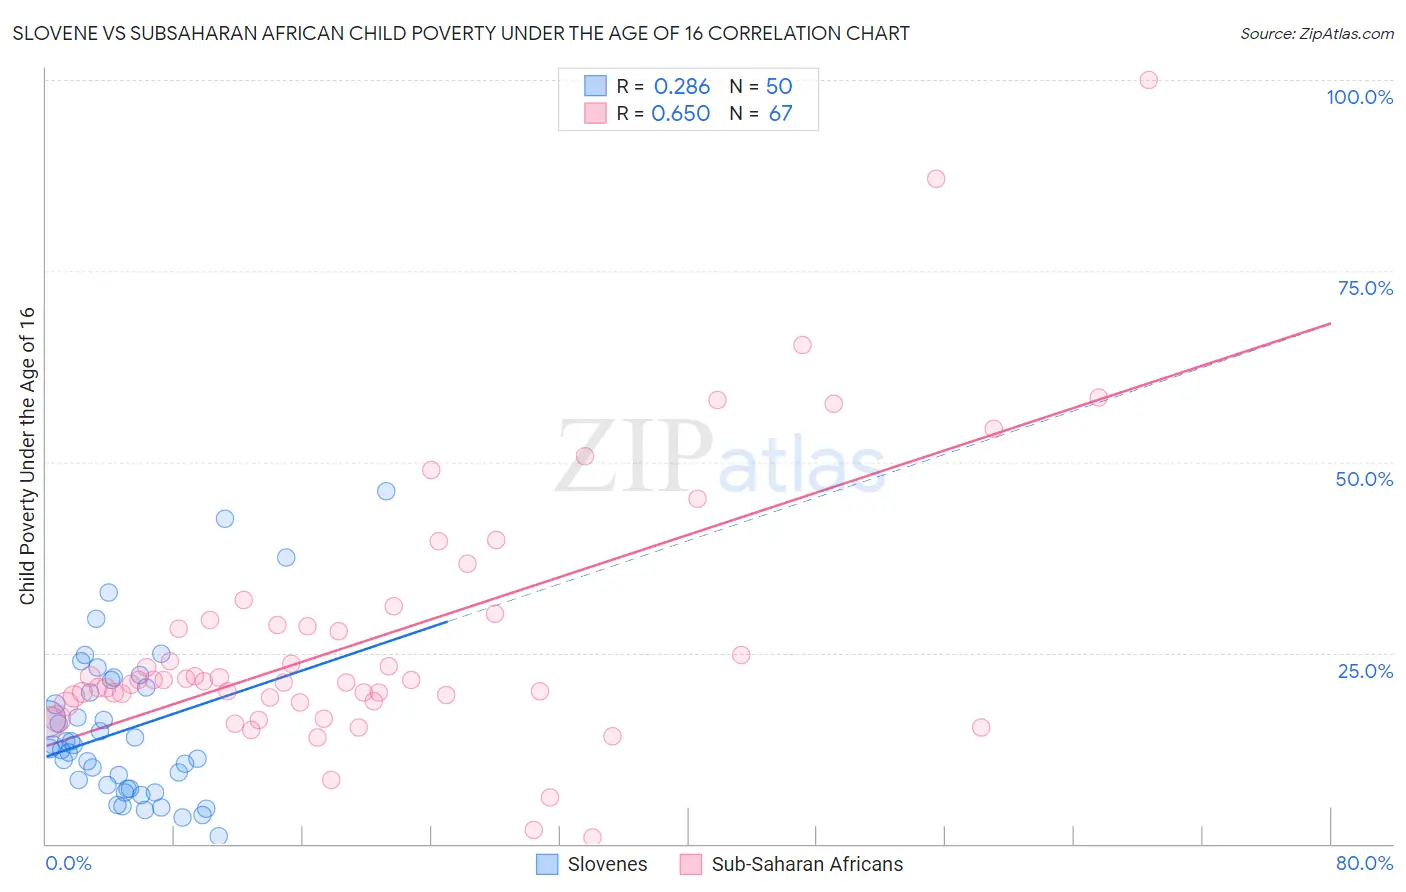 Slovene vs Subsaharan African Child Poverty Under the Age of 16